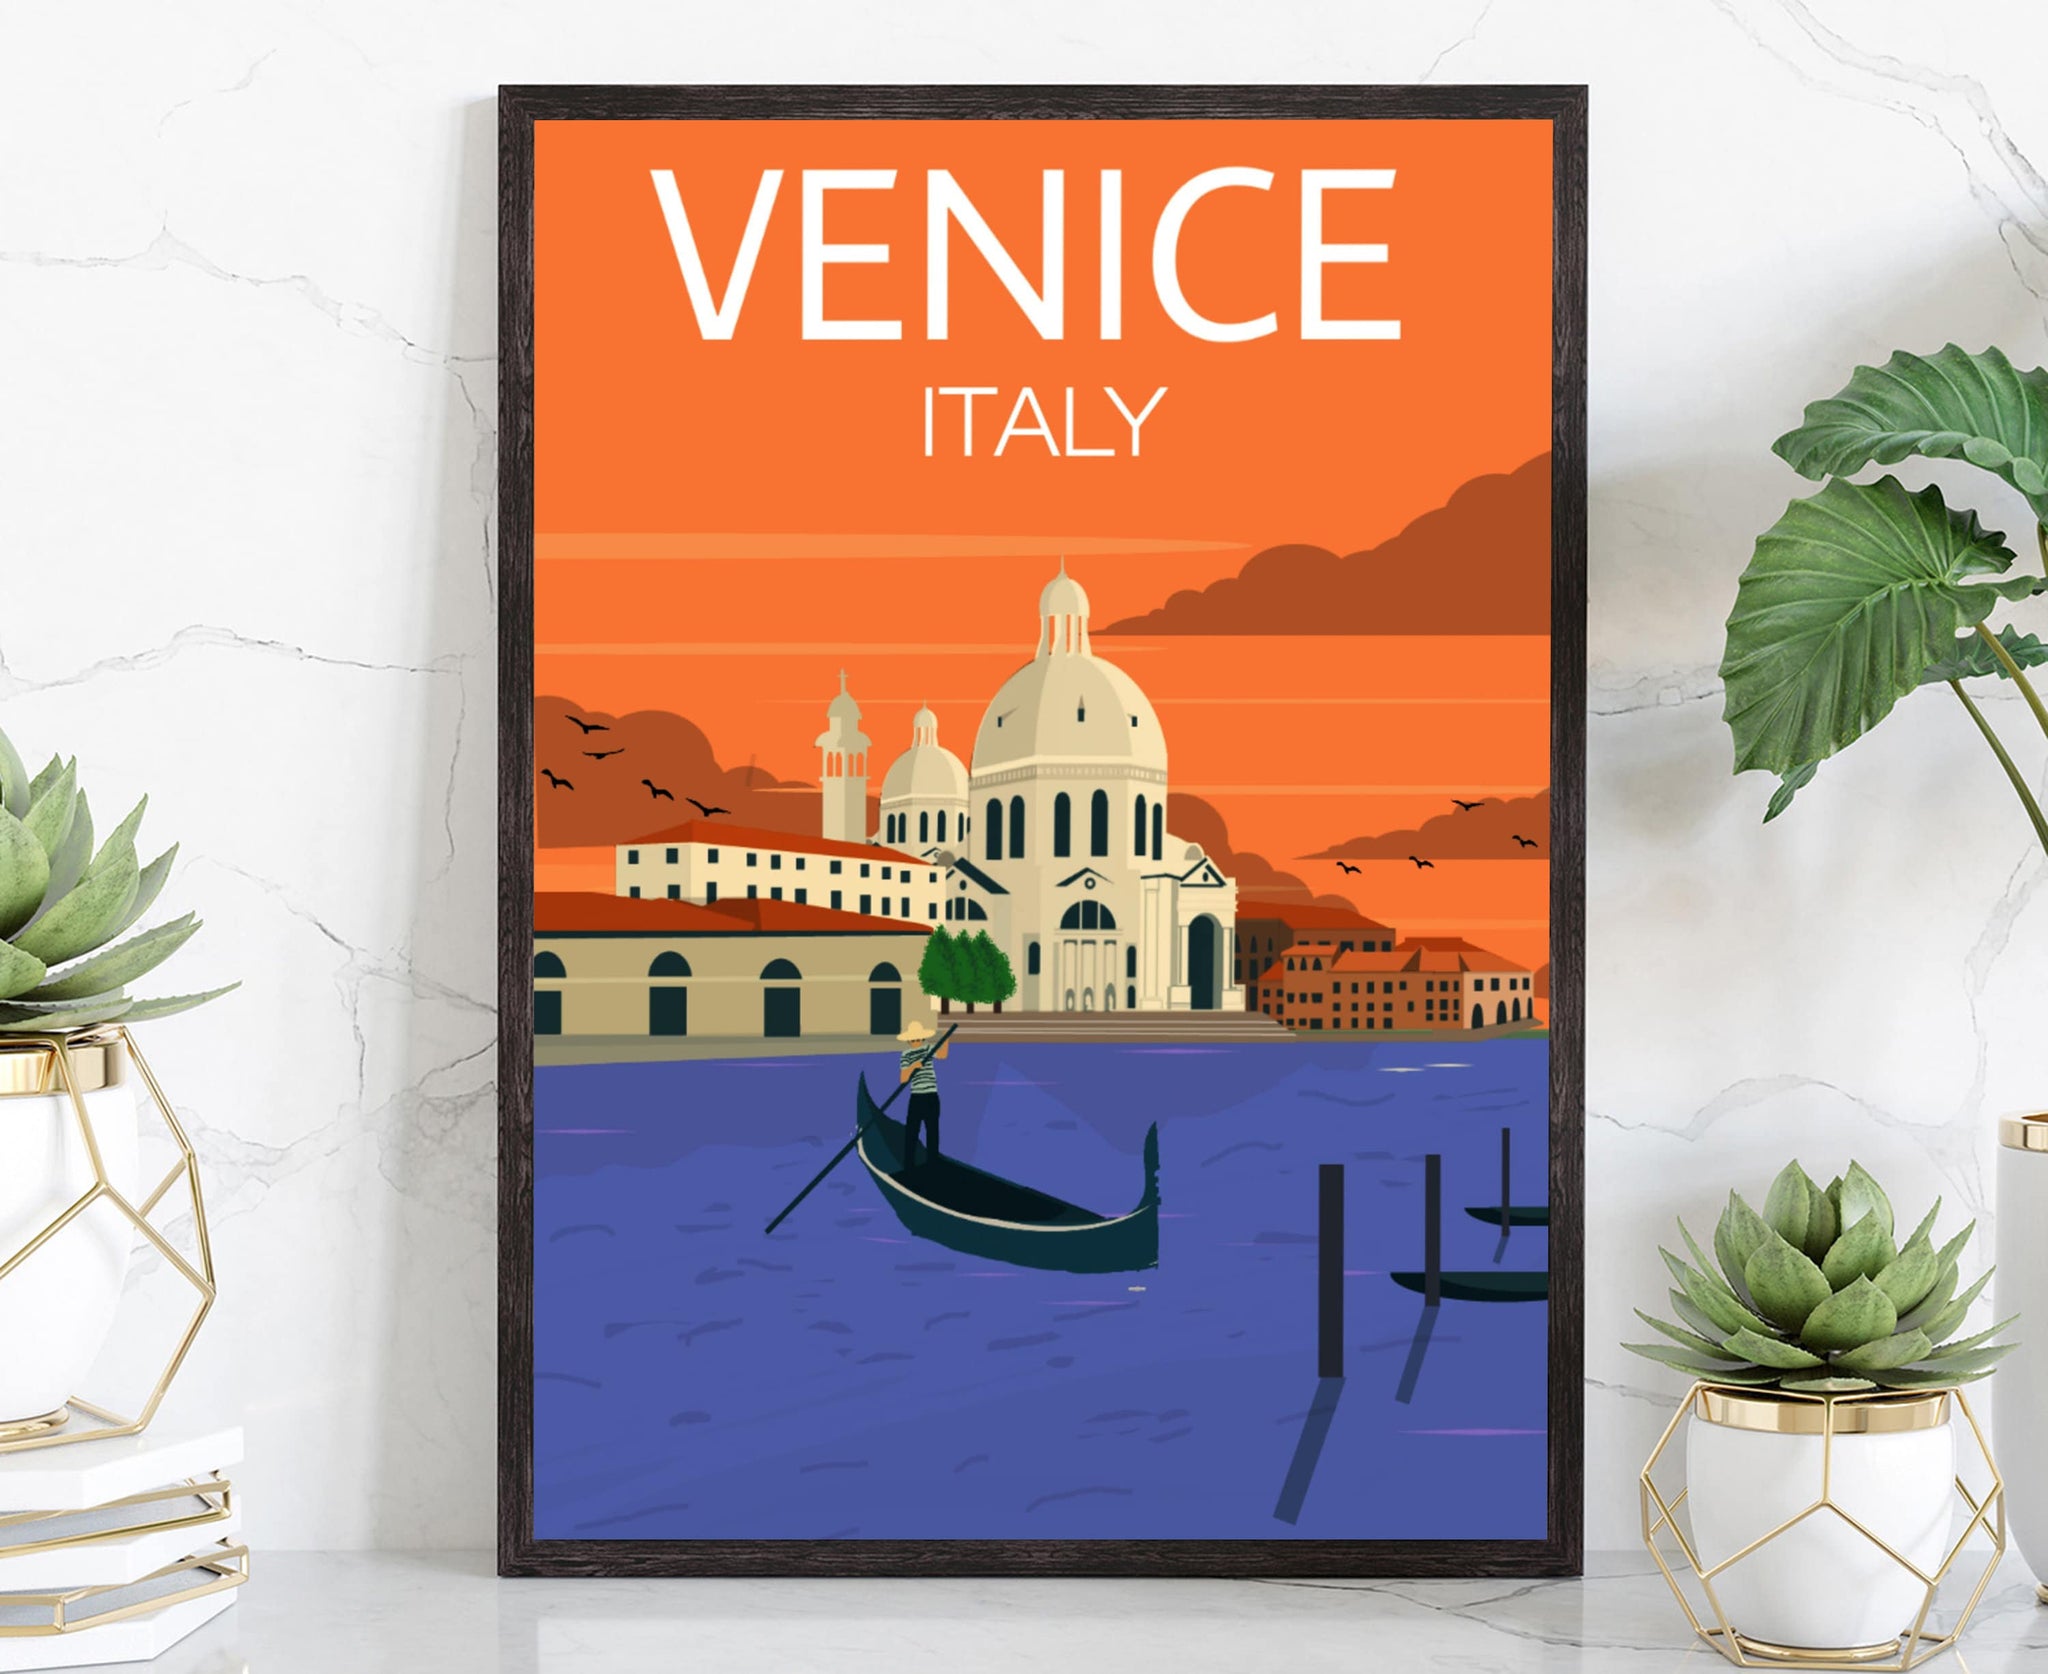 VENICE travel poster, Venice cityscape poster print, Venice Italy landmark poster wall artwork, Home wall art poster, Office wall decoration